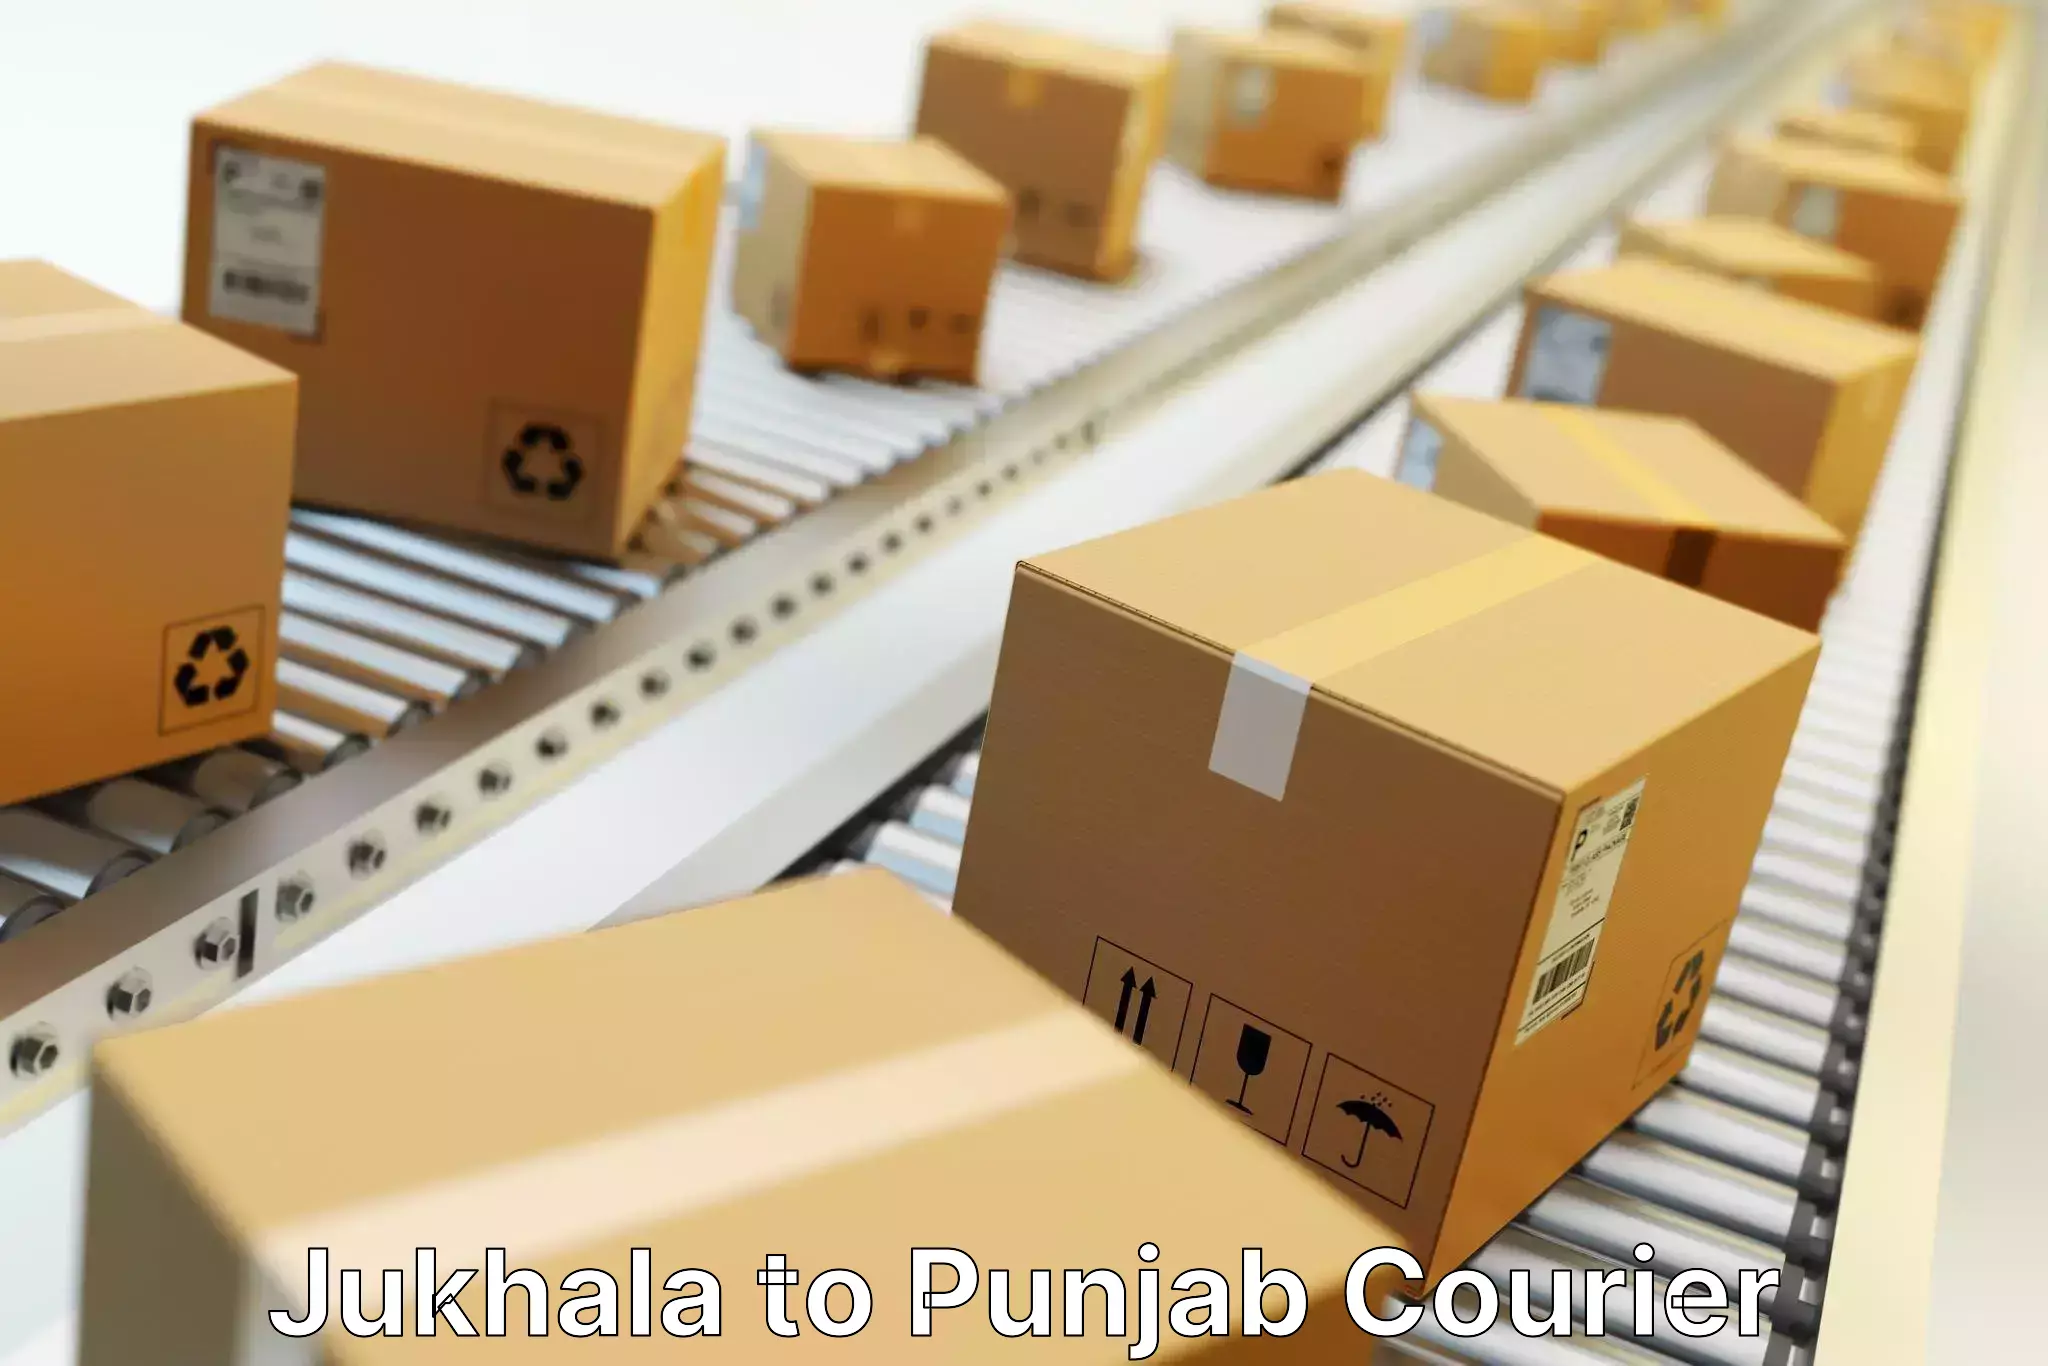 Quality courier services in Jukhala to Mandi Gobindgarh